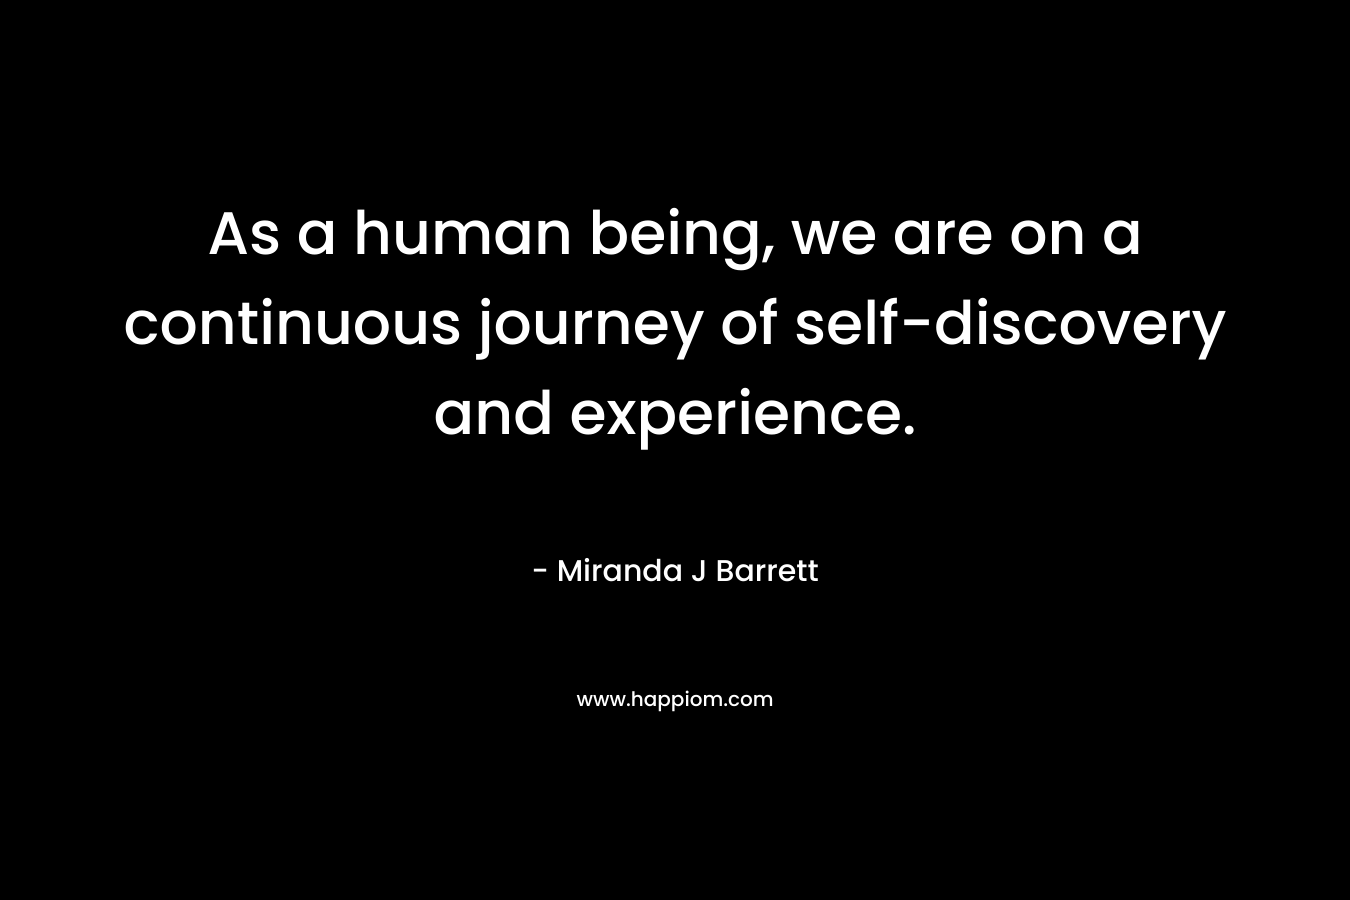 As a human being, we are on a continuous journey of self-discovery and experience. – Miranda J Barrett